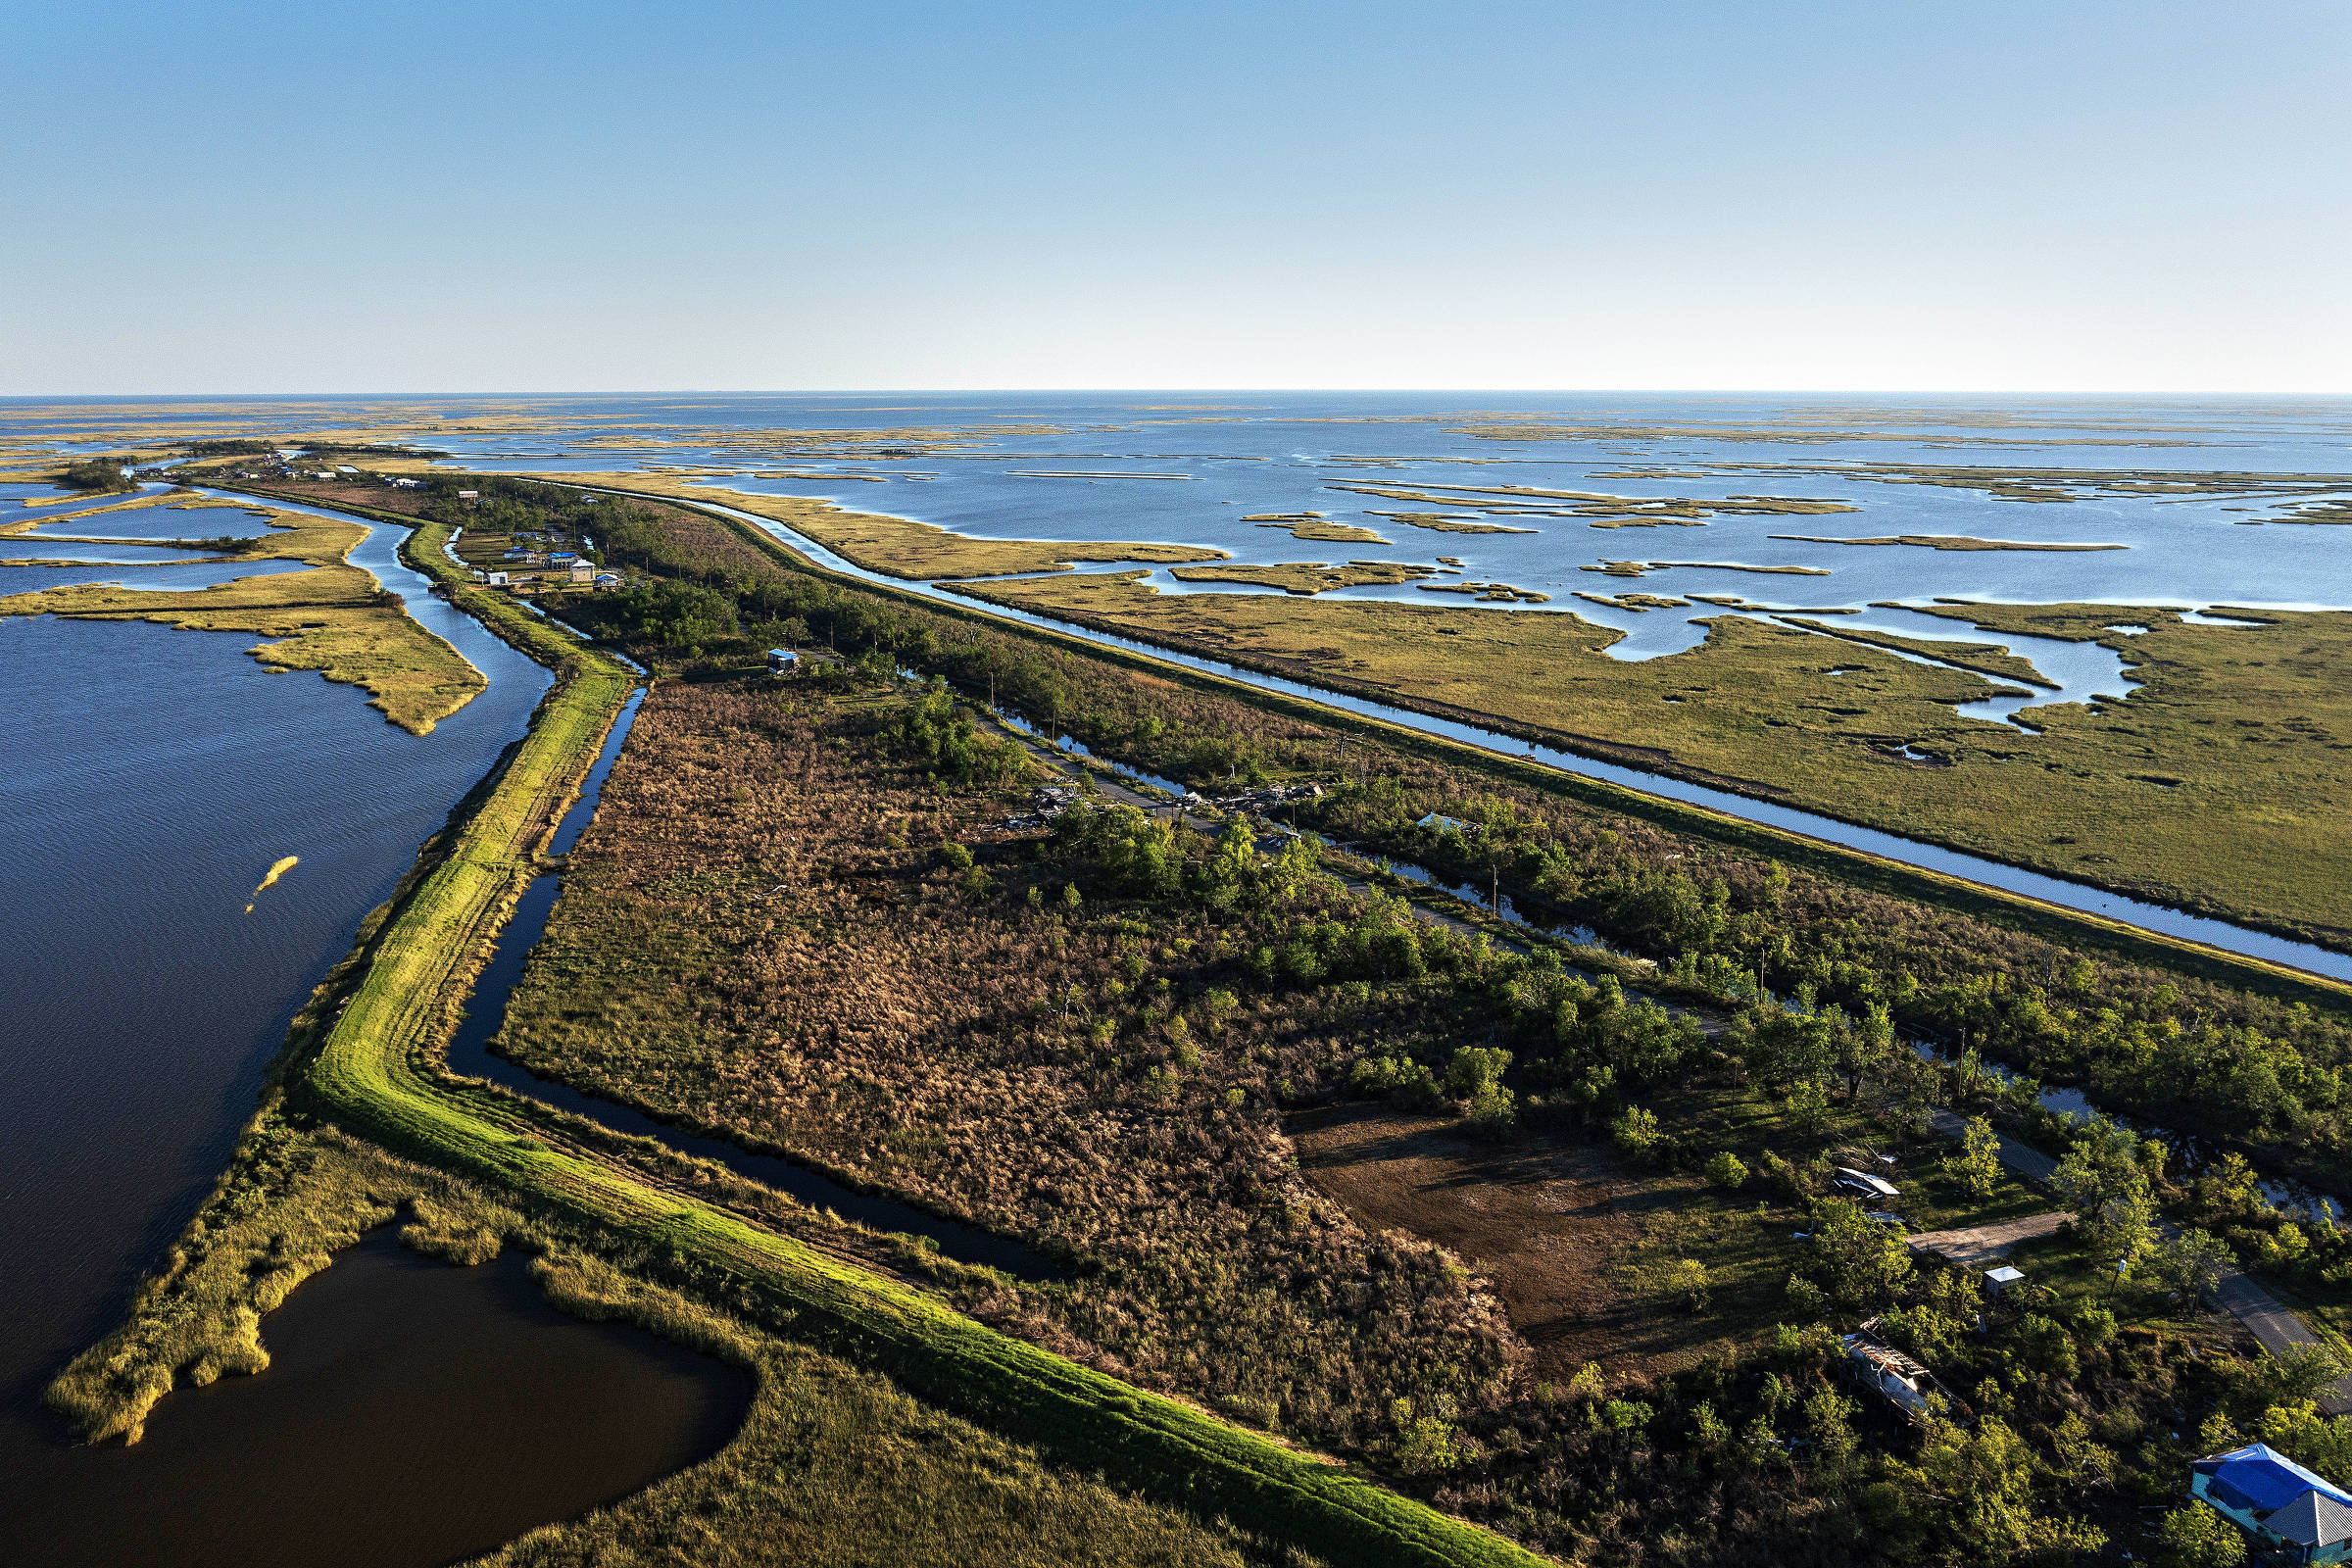 Jean Charles Island, an indigenous community off the coast of Louisiana hit hard by Hurricane Ida in August